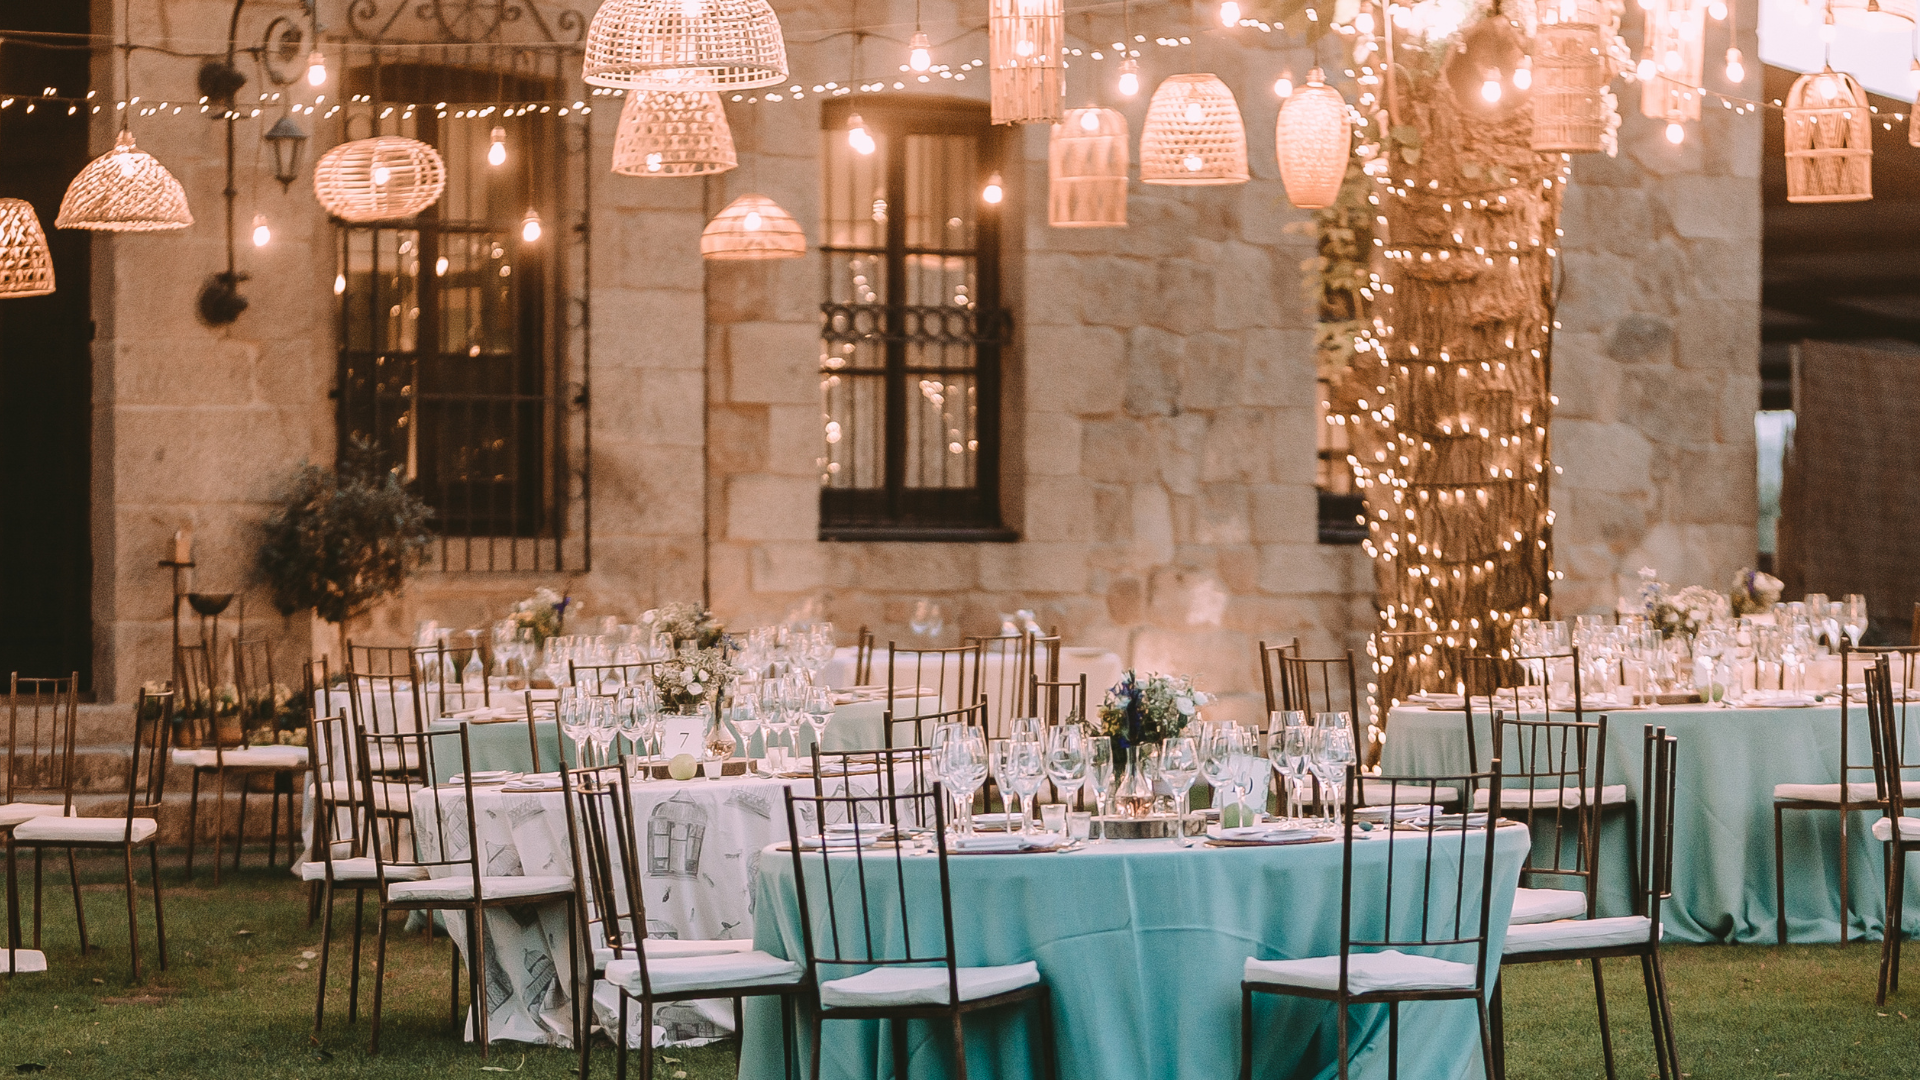 Planning Your Belated Wedding Reception